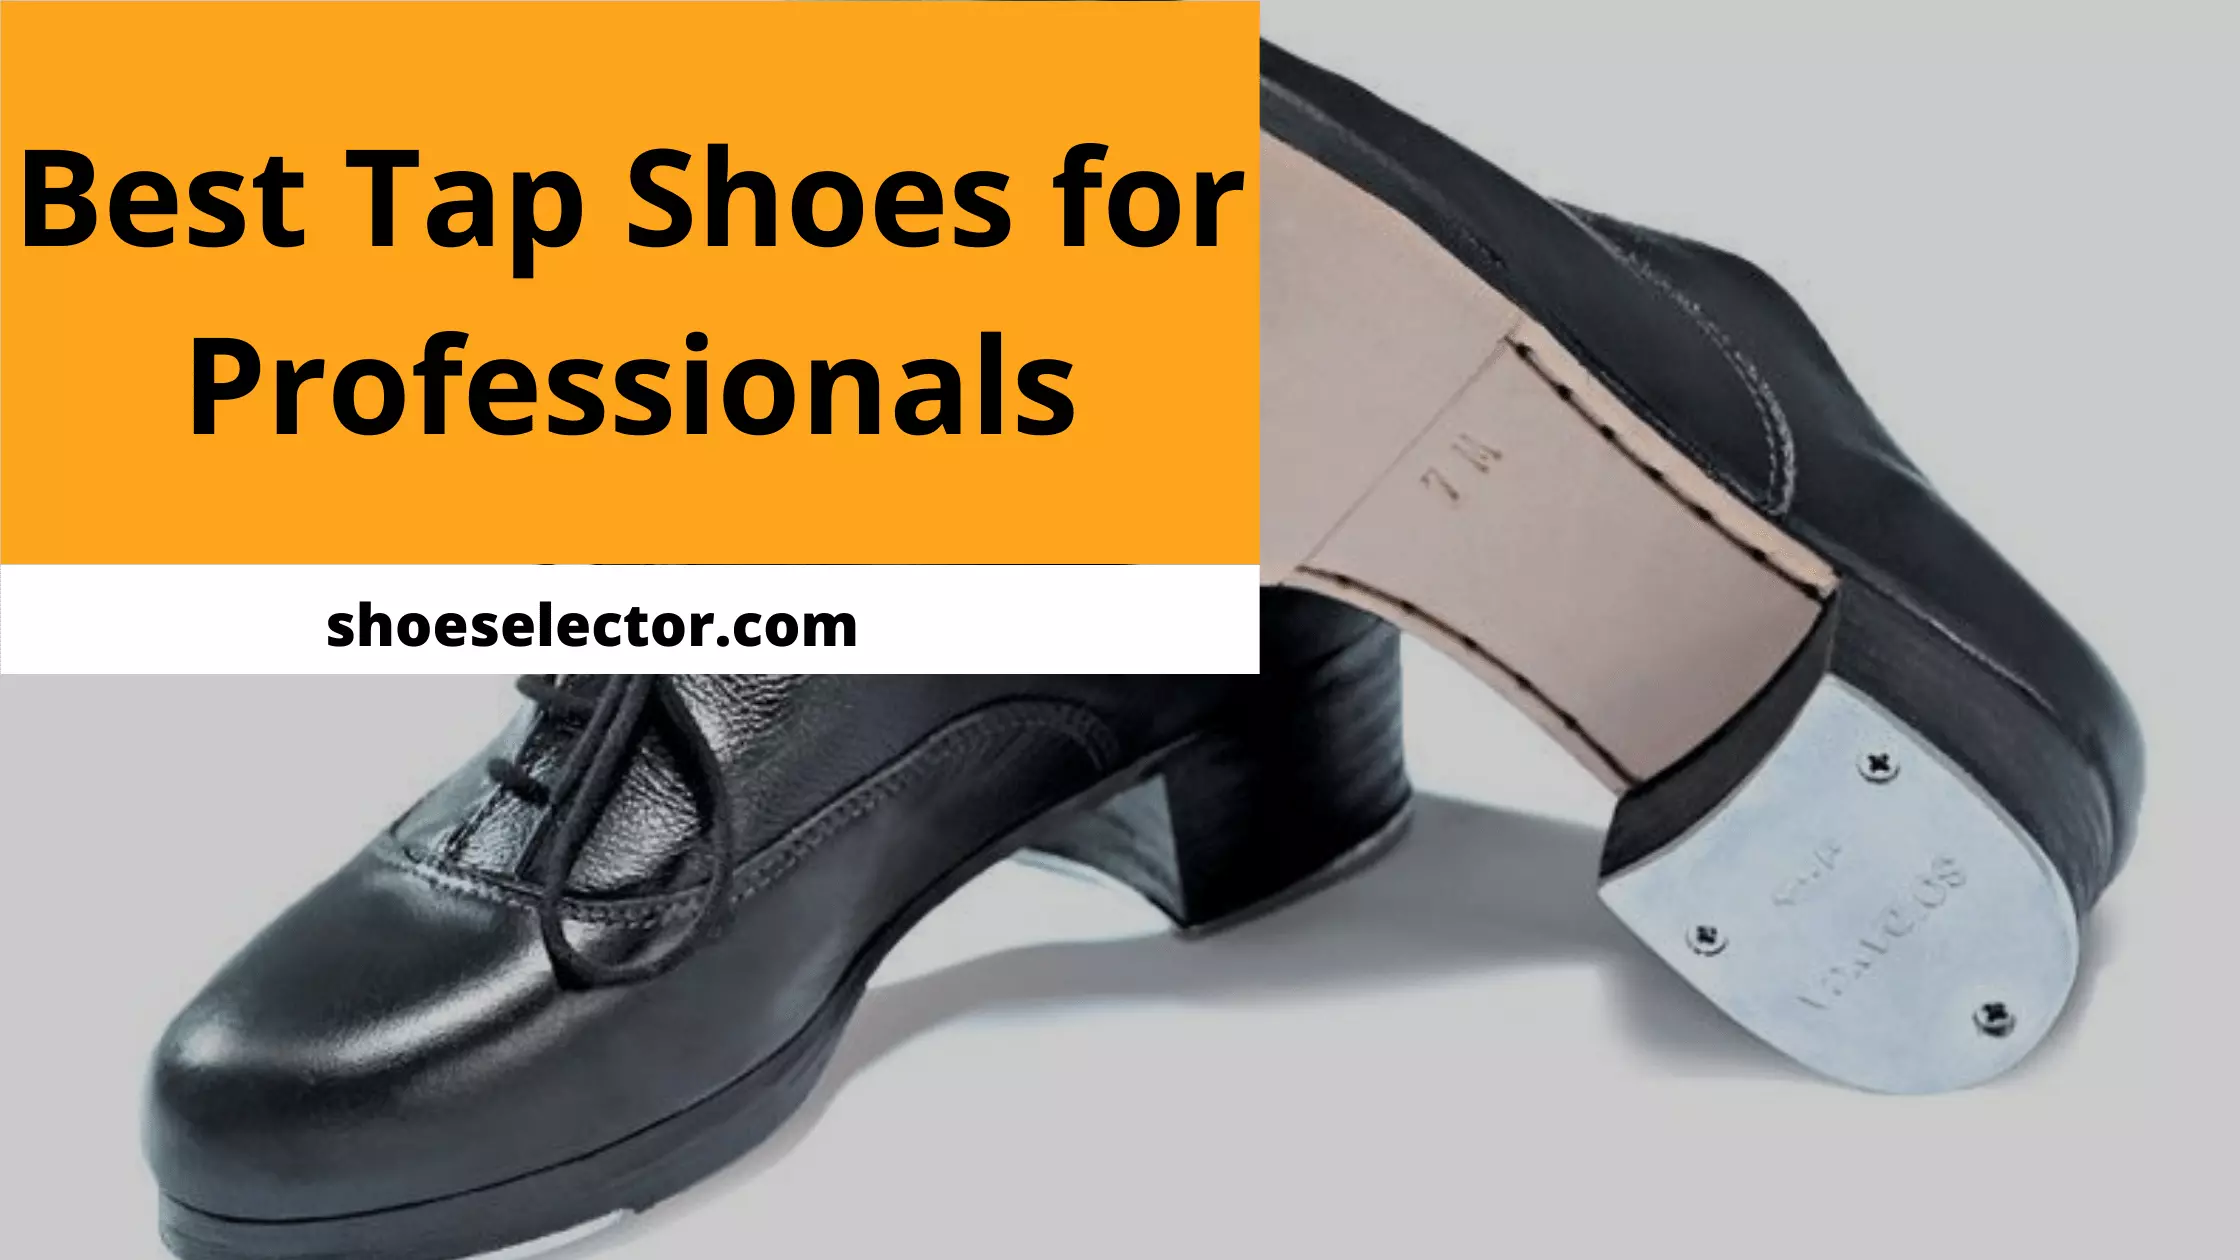 Best Tap Shoes For Professionals - Comprehensive Guide